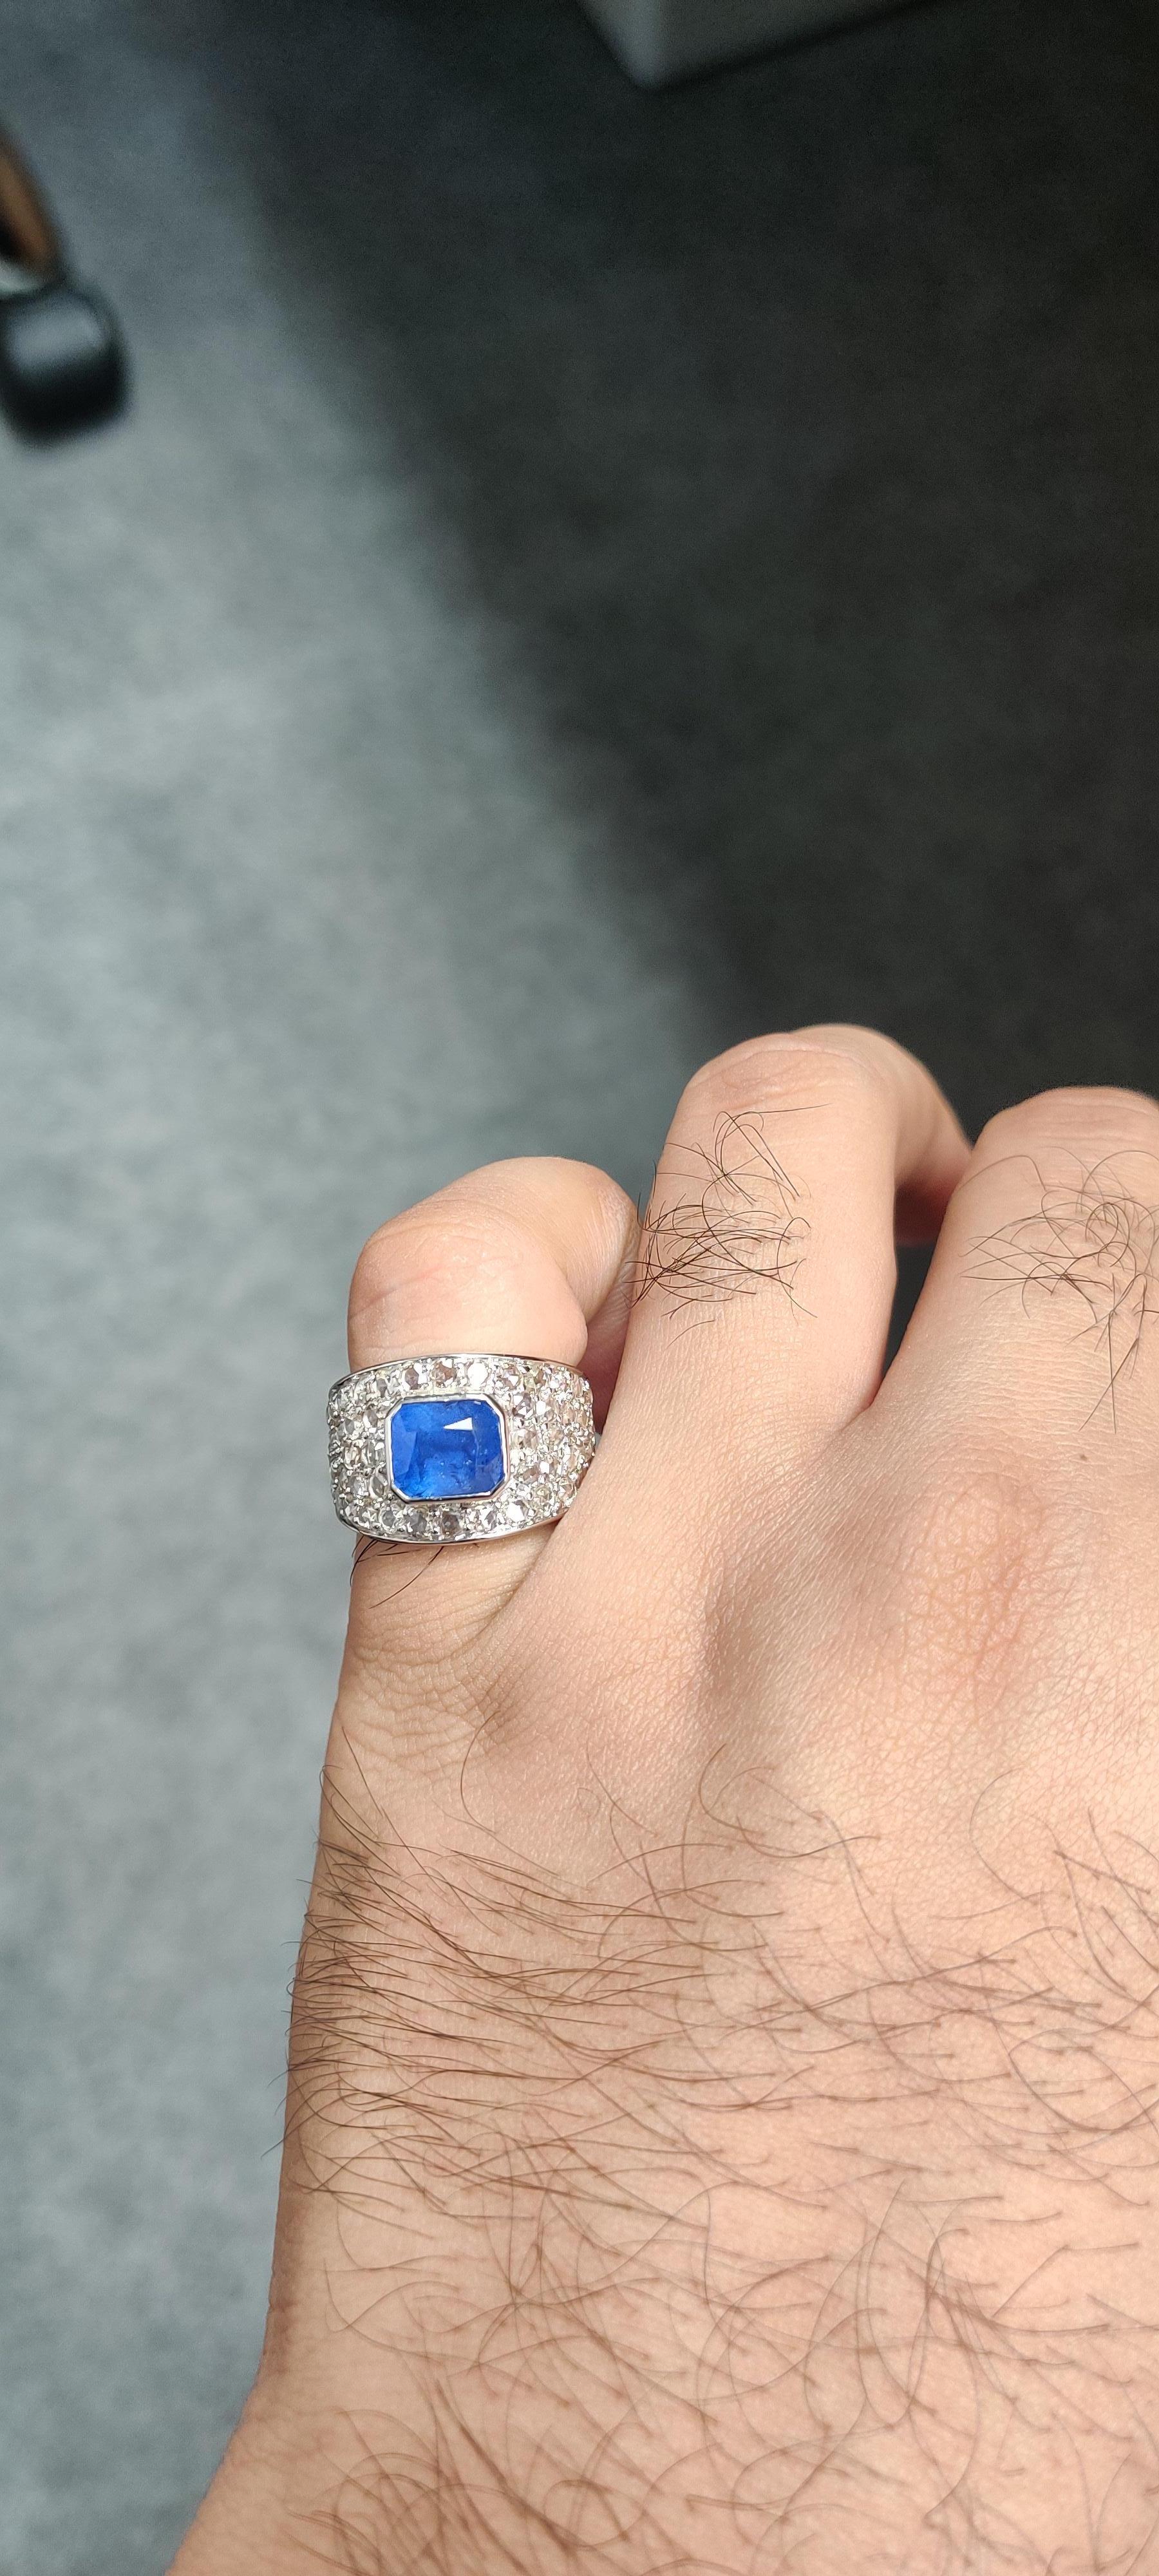 Men's 3.56 Carat Ceylon Sapphire Ring with Rose Cut Diamonds in 14k White Gold  For Sale 4